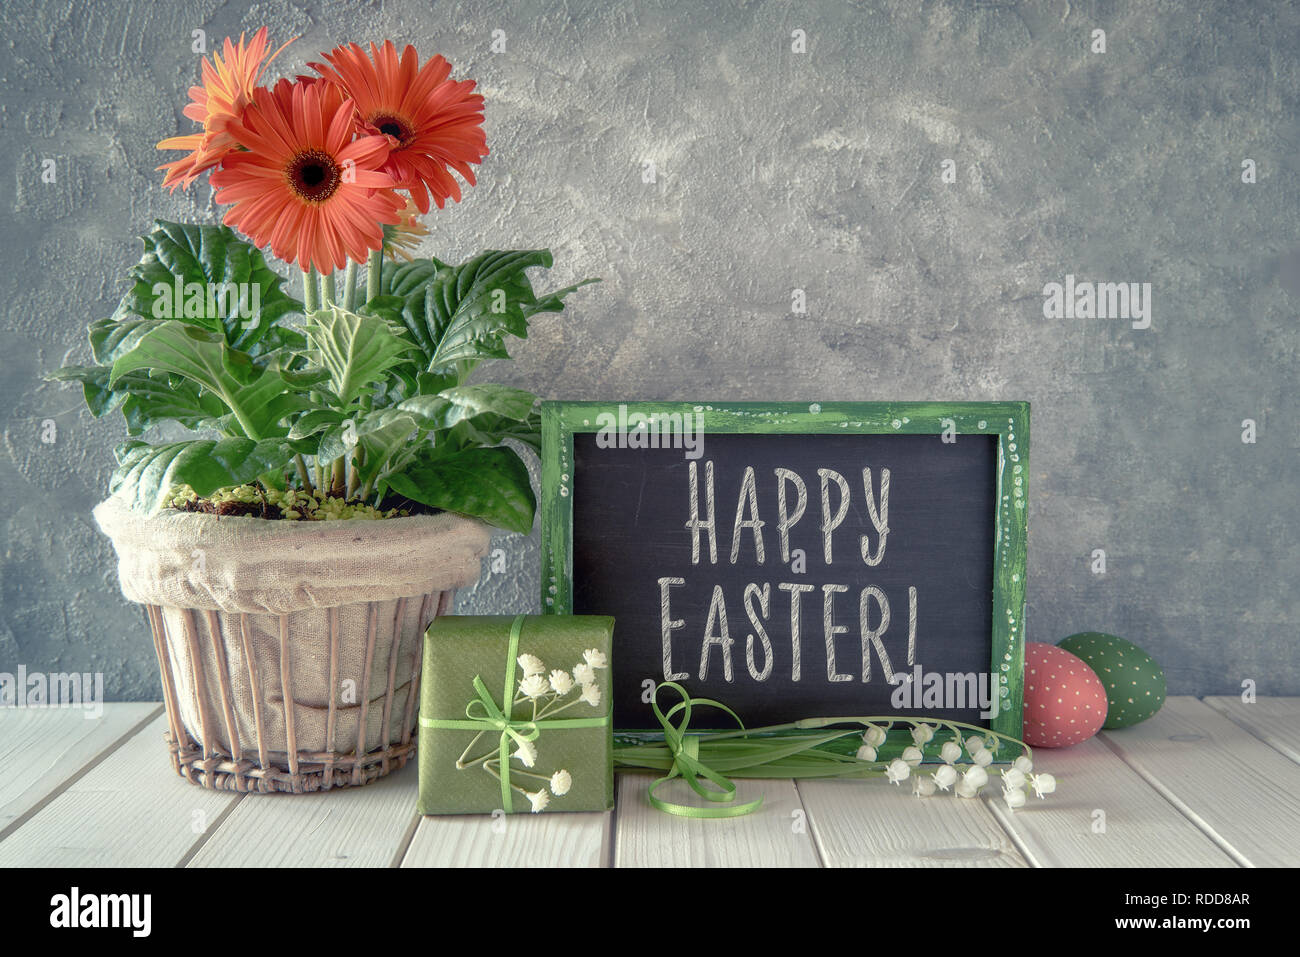 Spring flowers, Easter decorations and a blackboard on white table. Text 'Happy Easter!' on a blackboard. Stock Photo